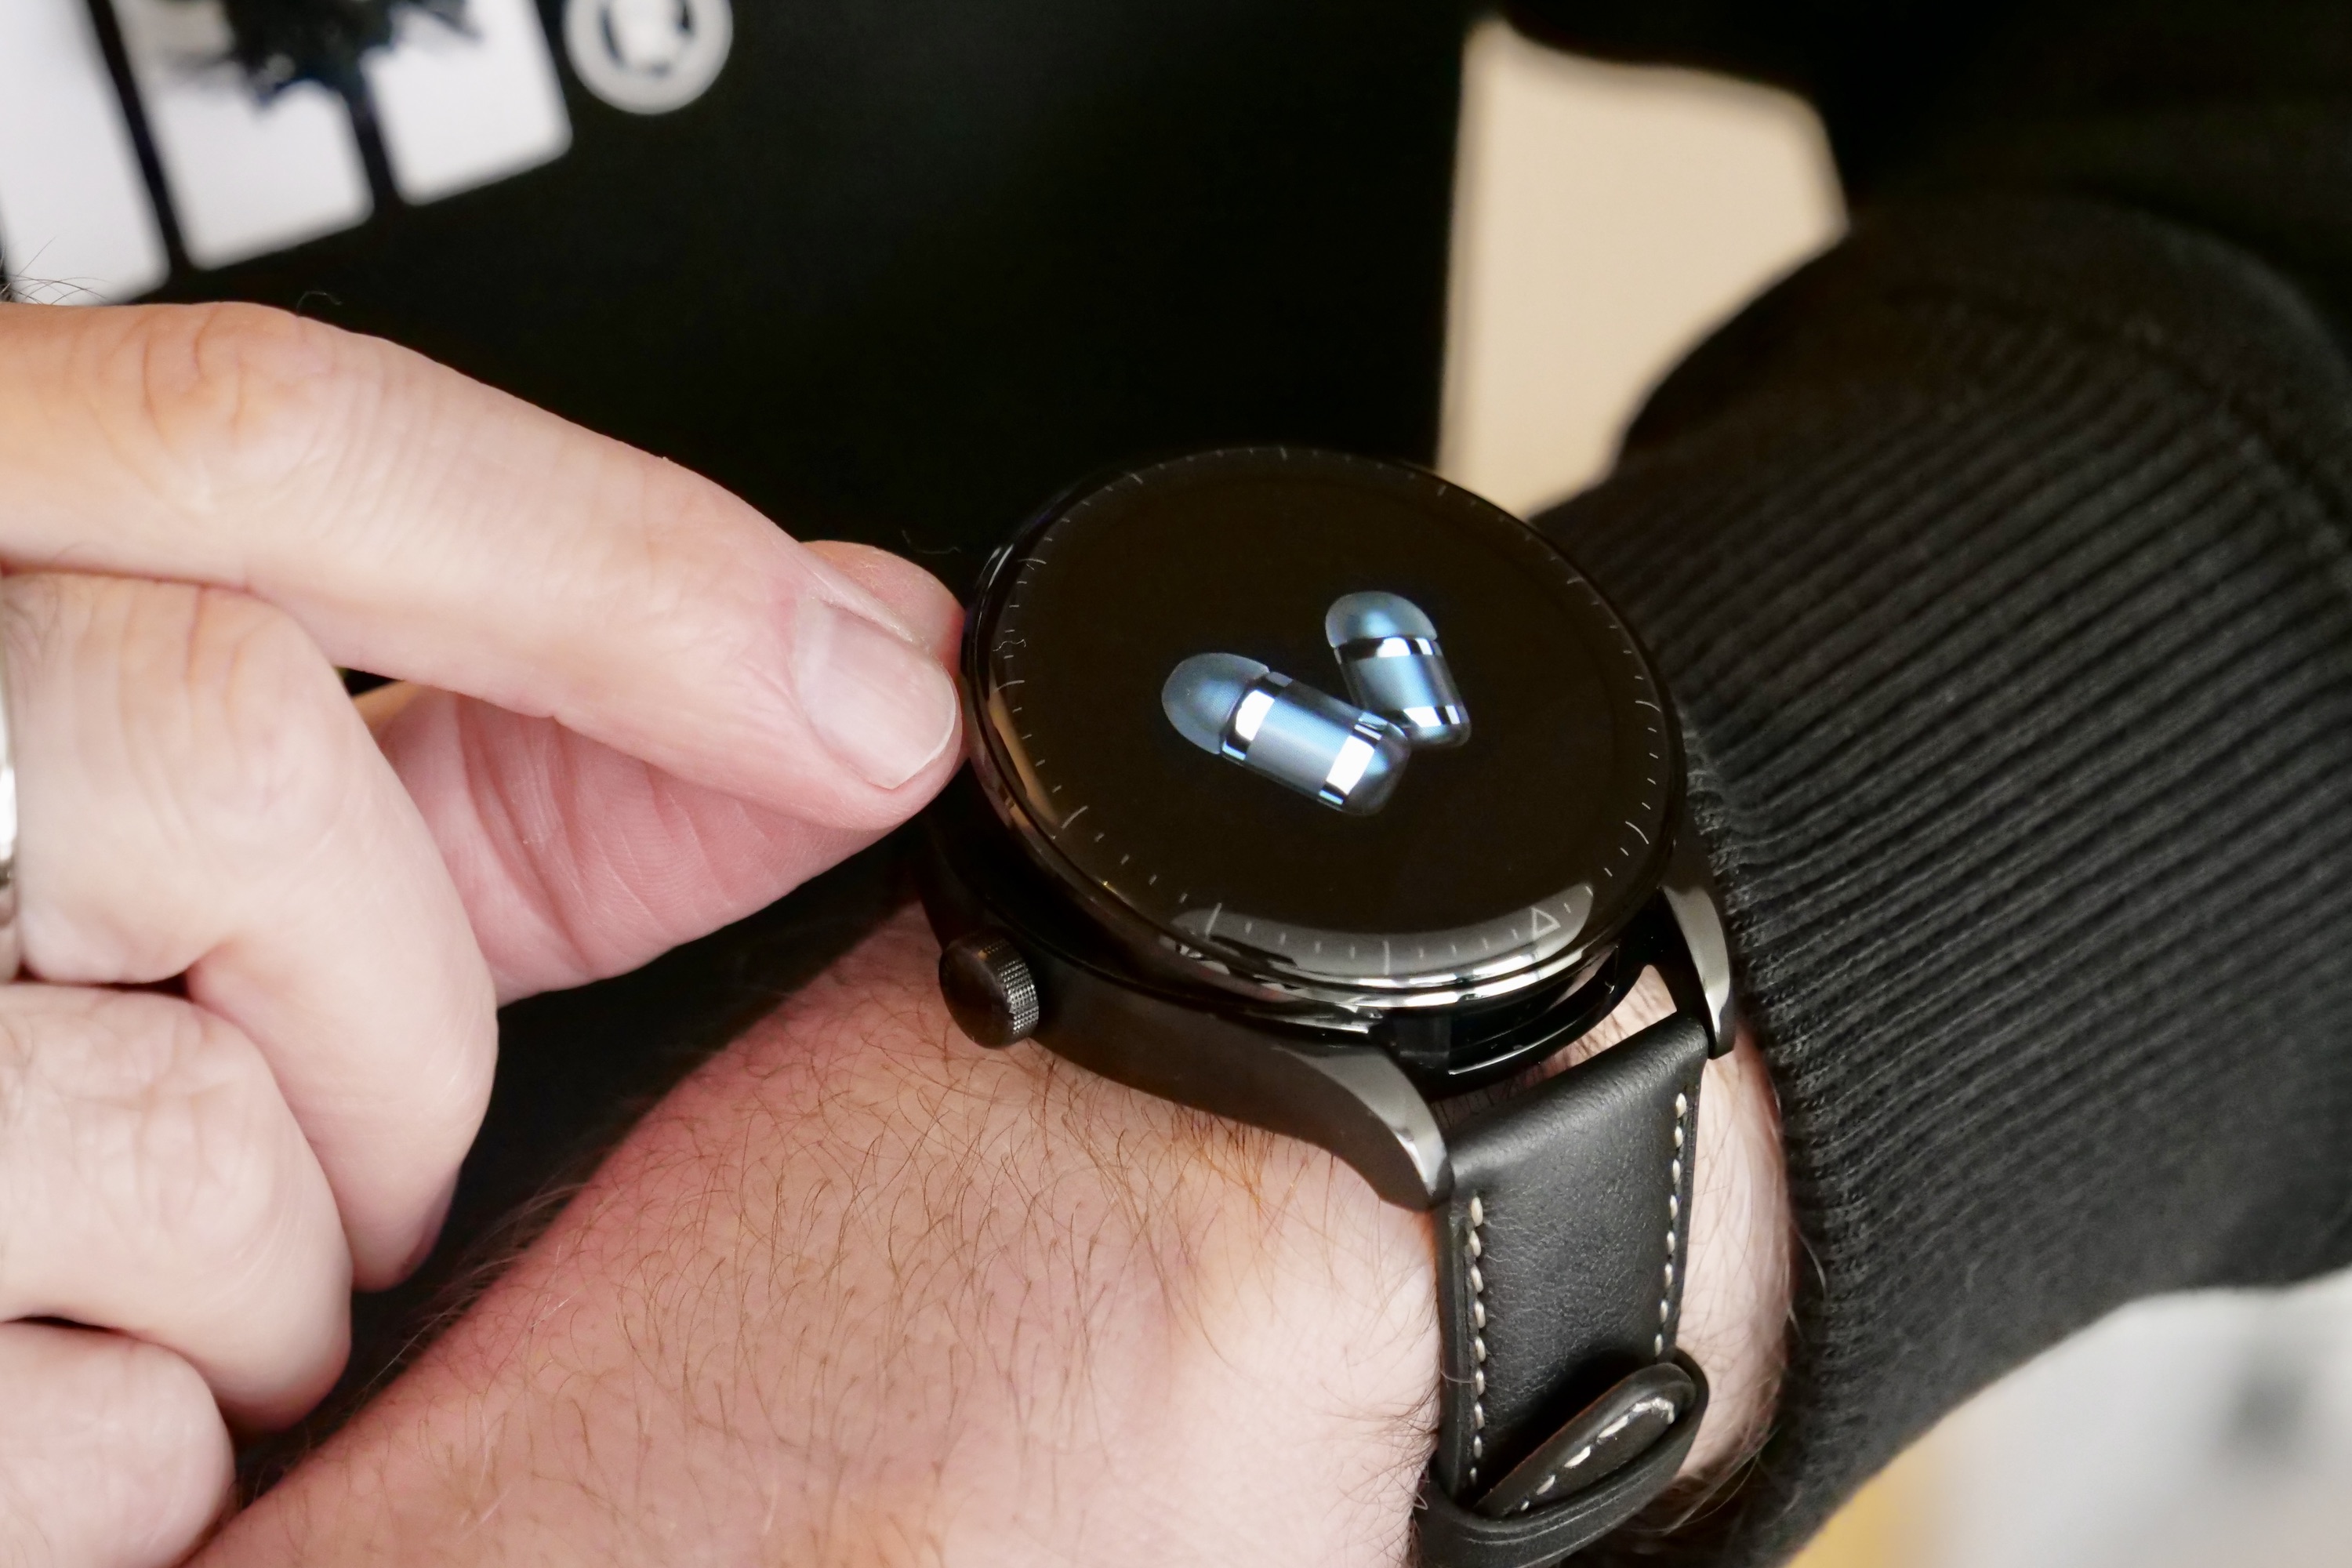 HUAWEI WATCH Buds - 2-in-1 Smartwatch and Earbuds 